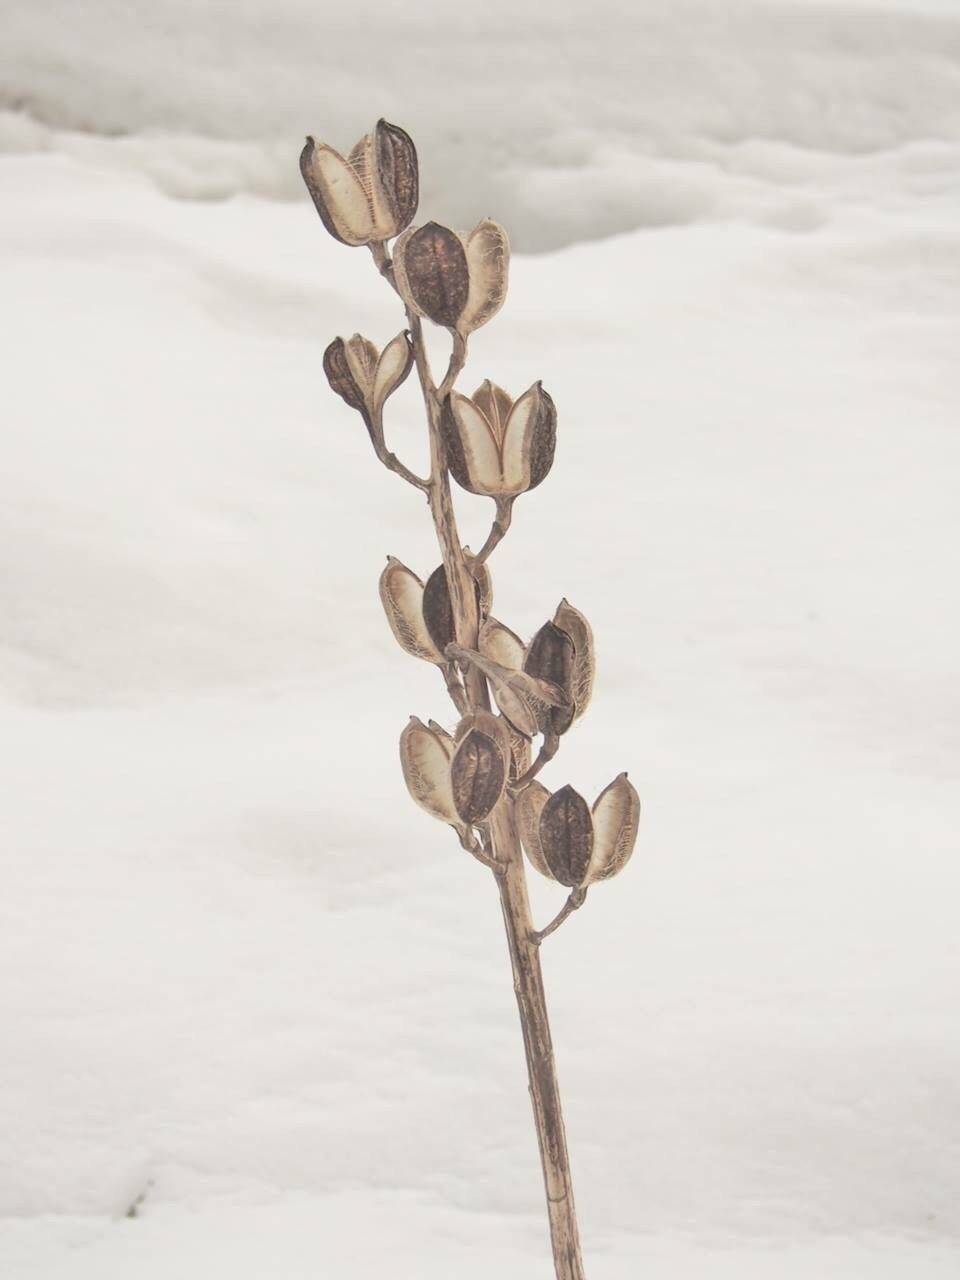 nature, tranquility, growth, snow, close-up, winter, beauty in nature, stem, sky, dead plant, plant, cold temperature, day, branch, no people, focus on foreground, tranquil scene, outdoors, field, season